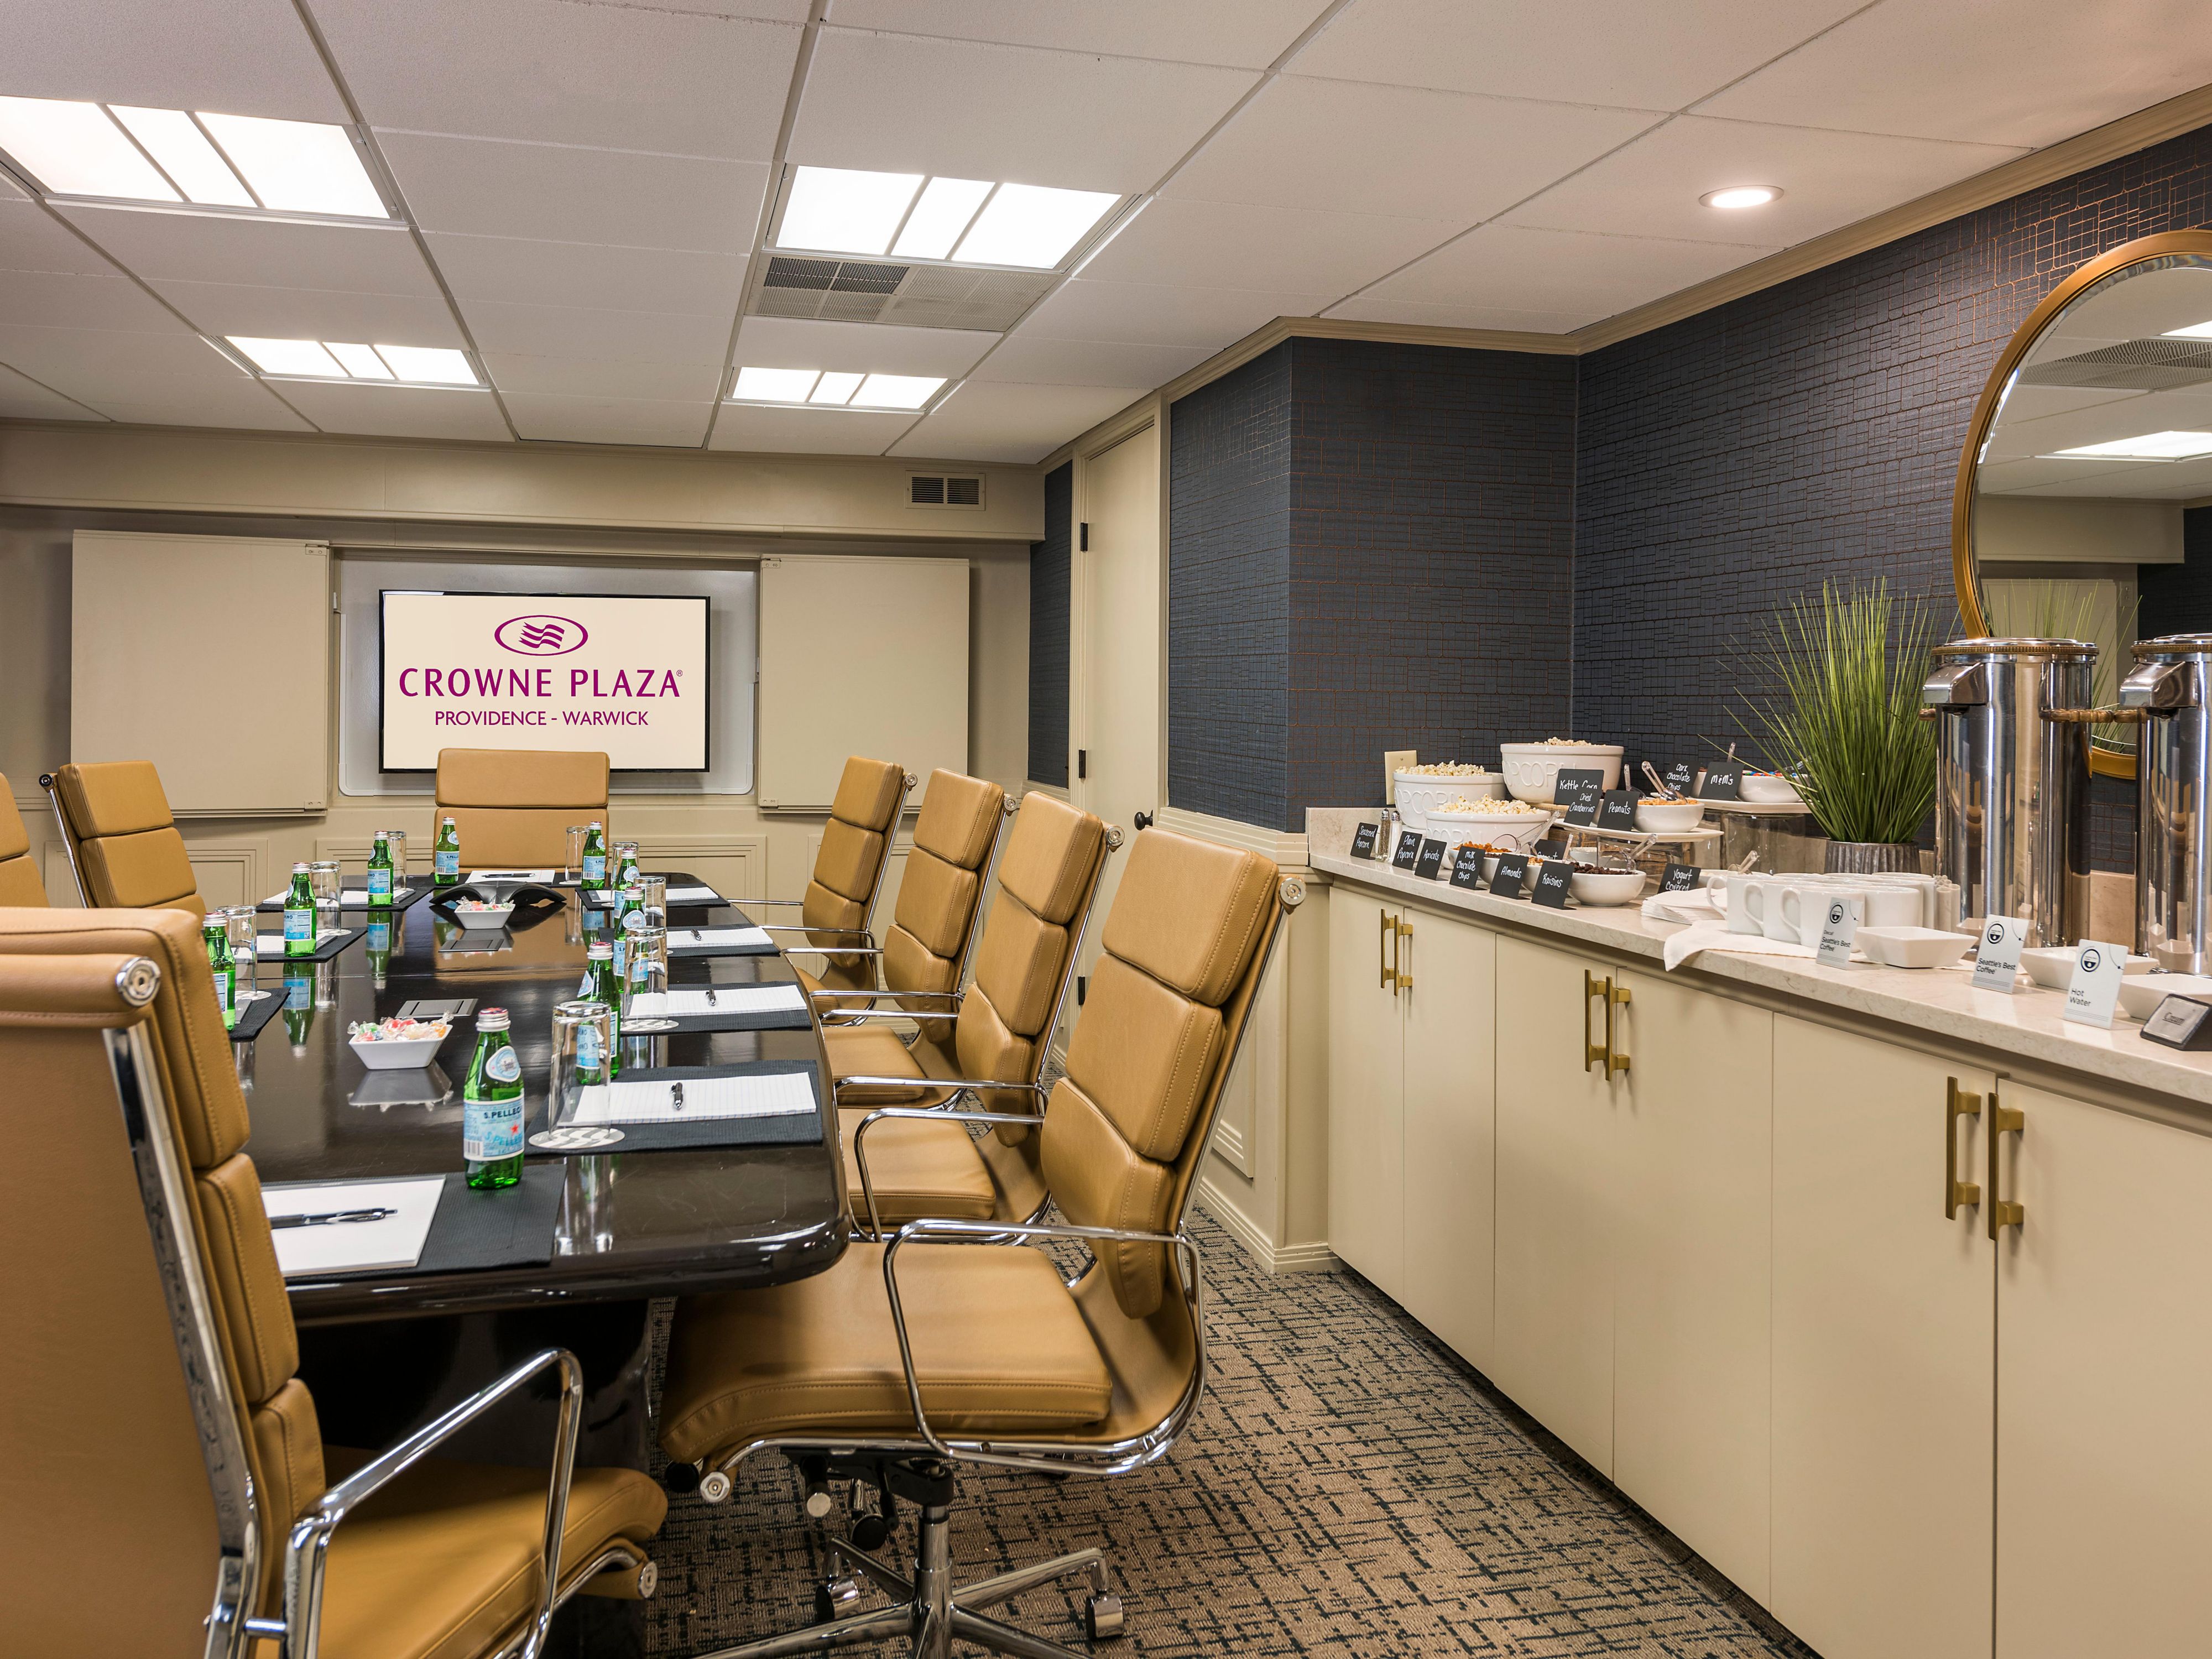 With over 45,000 square feet of meeting space, including a grand ballroom and several smaller breakout rooms, Crowne Plaza® Providence-Warwick (Airport) is the perfect choice for your next business event or conference. Our experienced team is on hand to help you plan every detail.